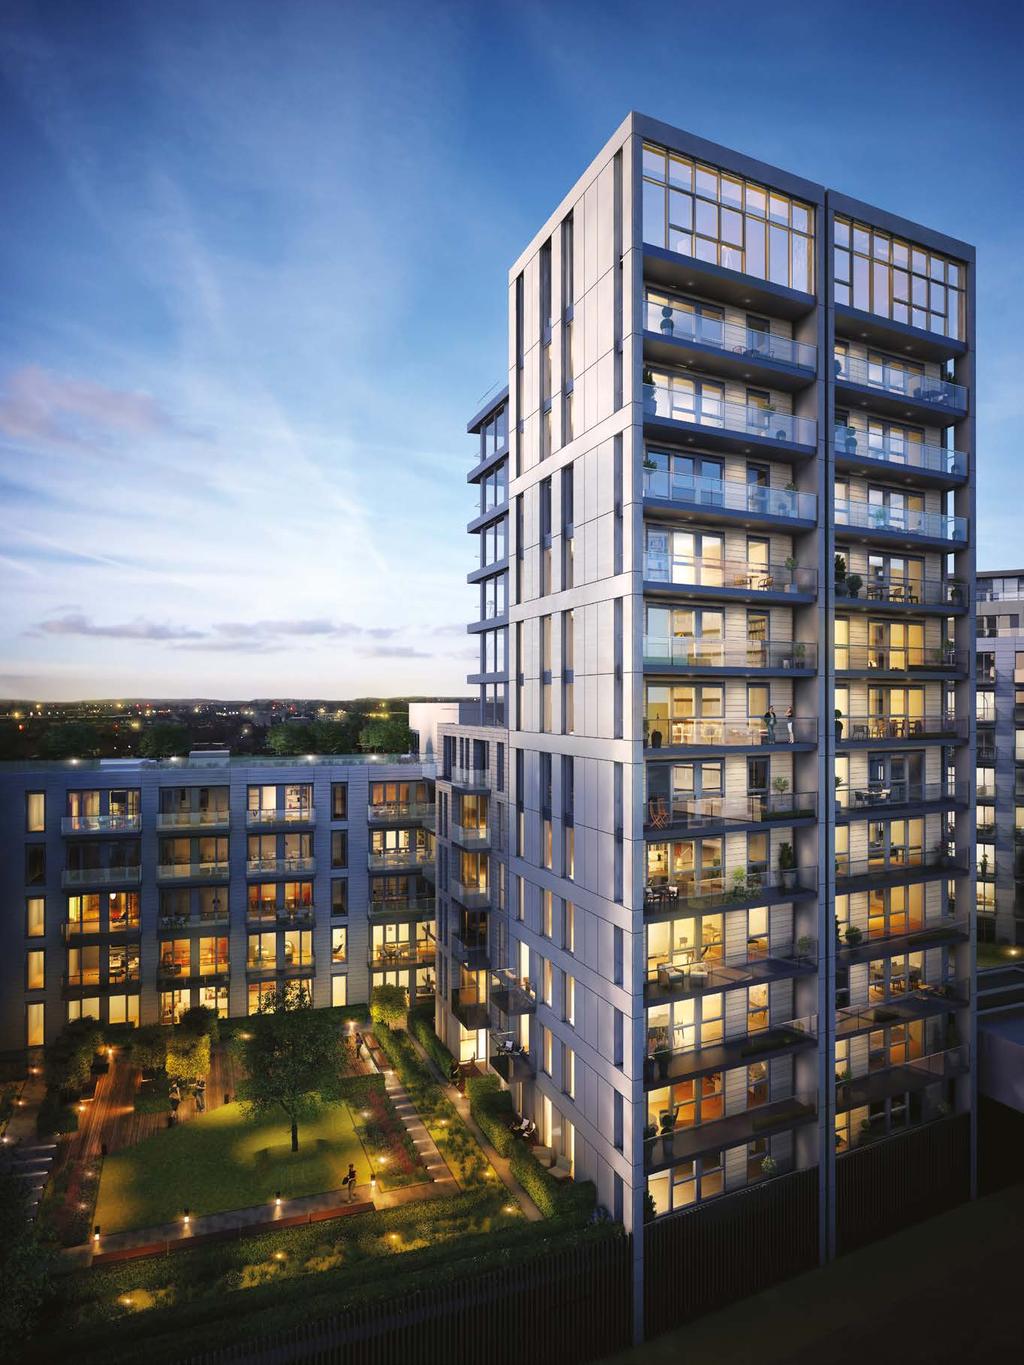 4TH FLOOR Yours to discover BEAULIEU APARTMENT 36 Sovereign Court, located in Hammersmith, West London is one of the capital s fastest-growing and most desirable locations, offering quick, convenient